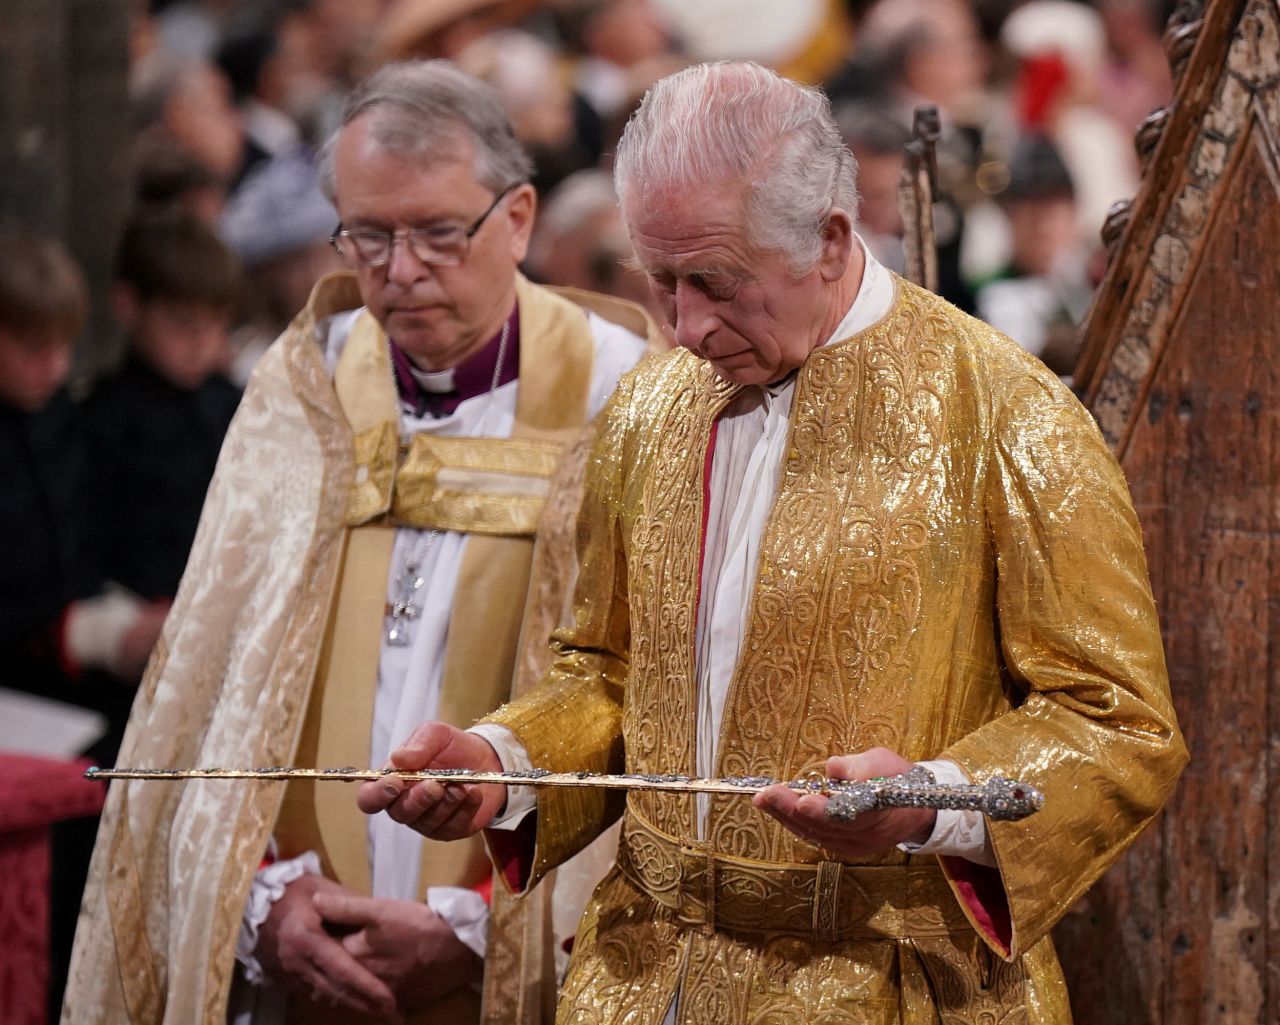 The King holds a sword during the ceremony.